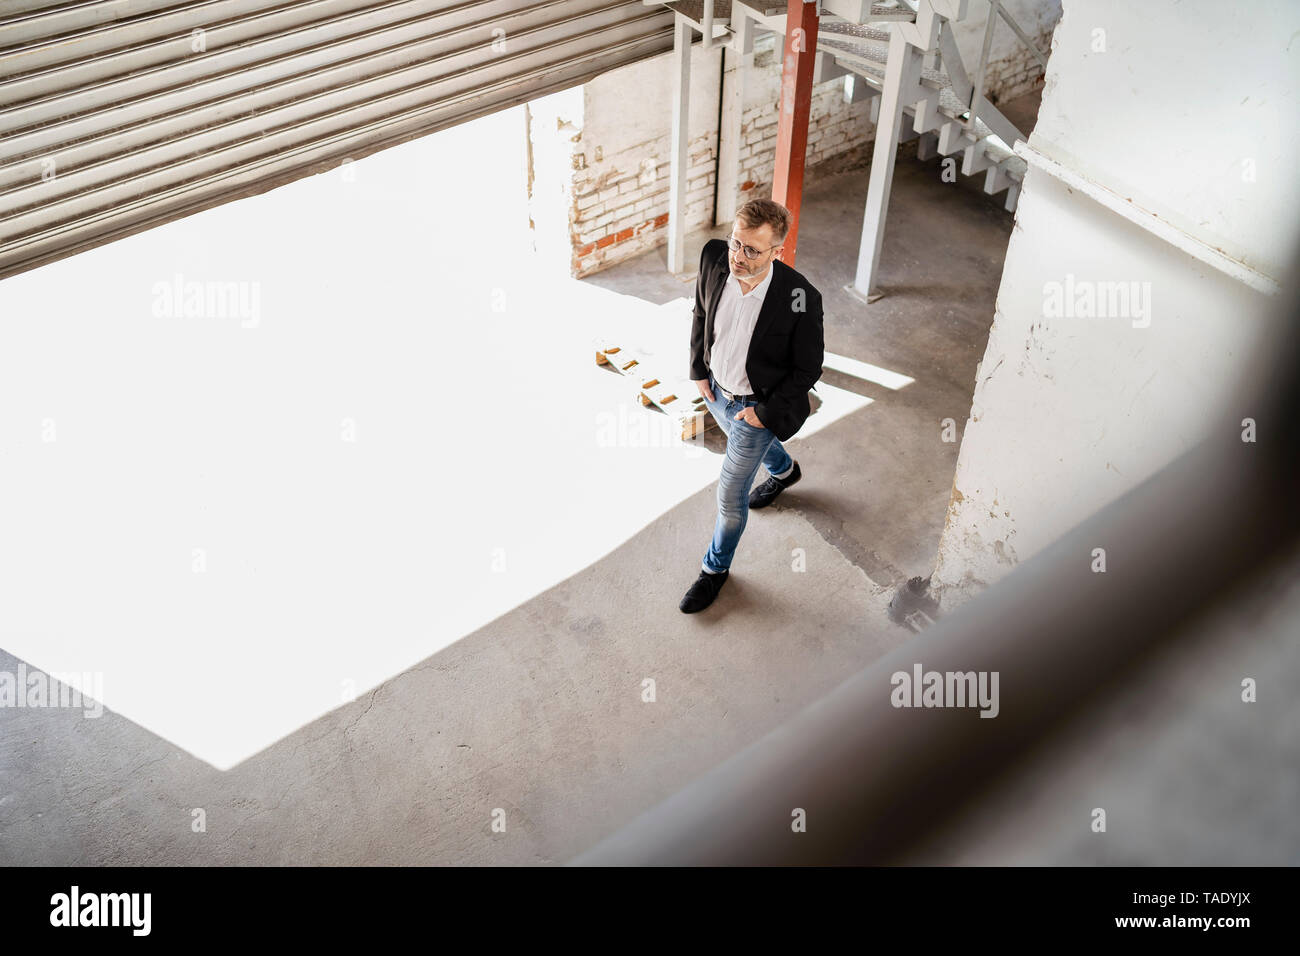 Bird's eye view of businesman walking at loading bay in a factory Stock Photo